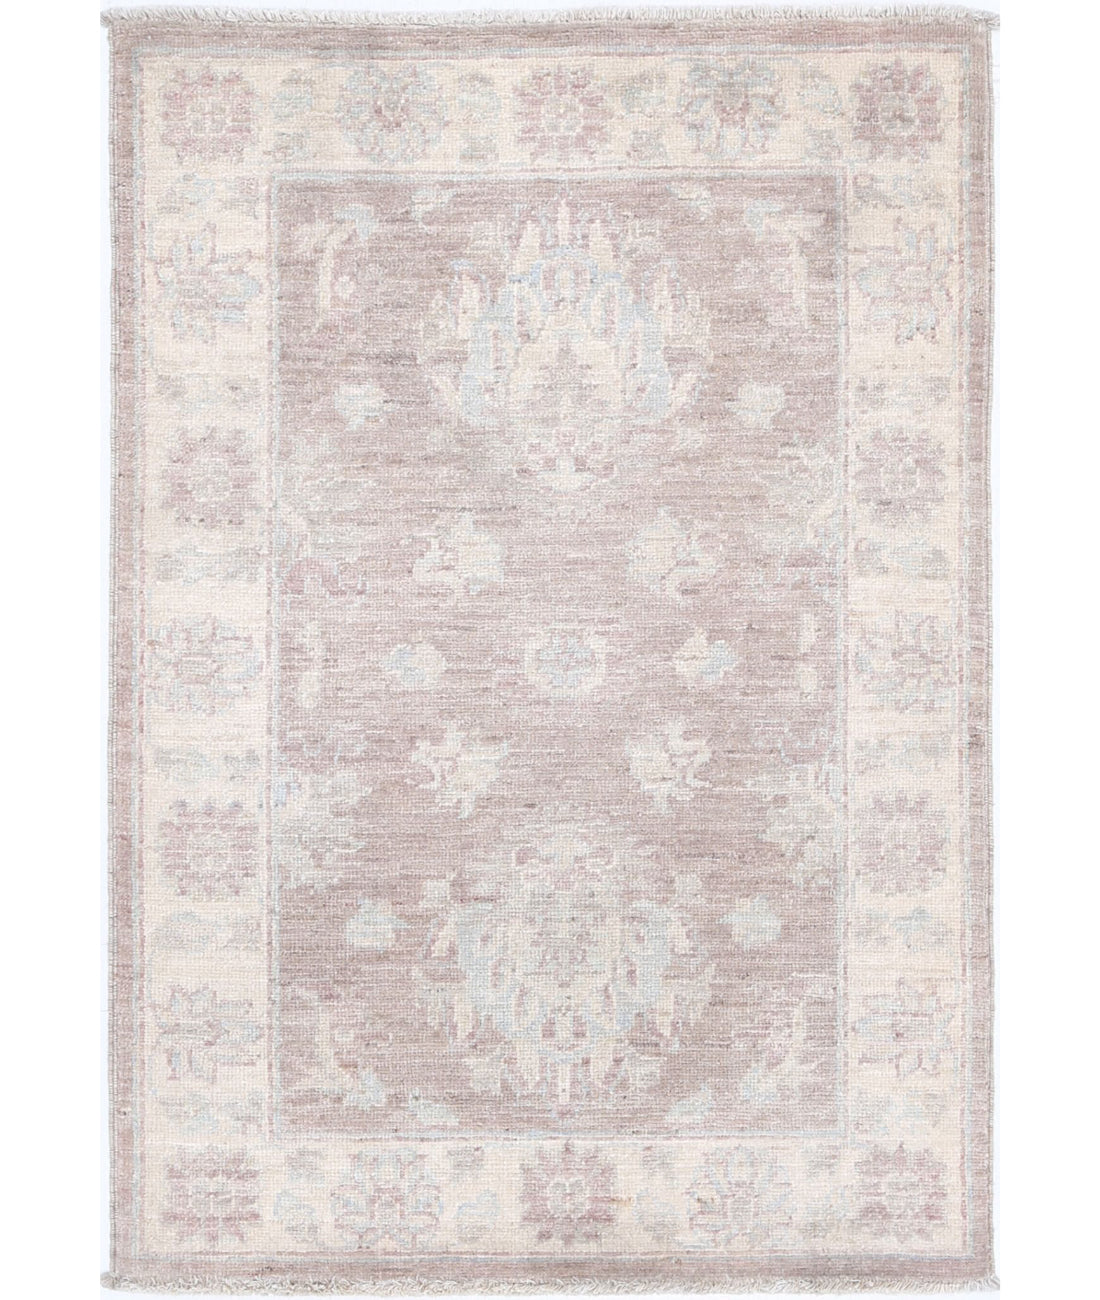 Hand Knotted Serenity Wool Rug - 2'2'' x 3'1'' 2'2'' x 3'1'' (65 X 93) / Brown / Ivory